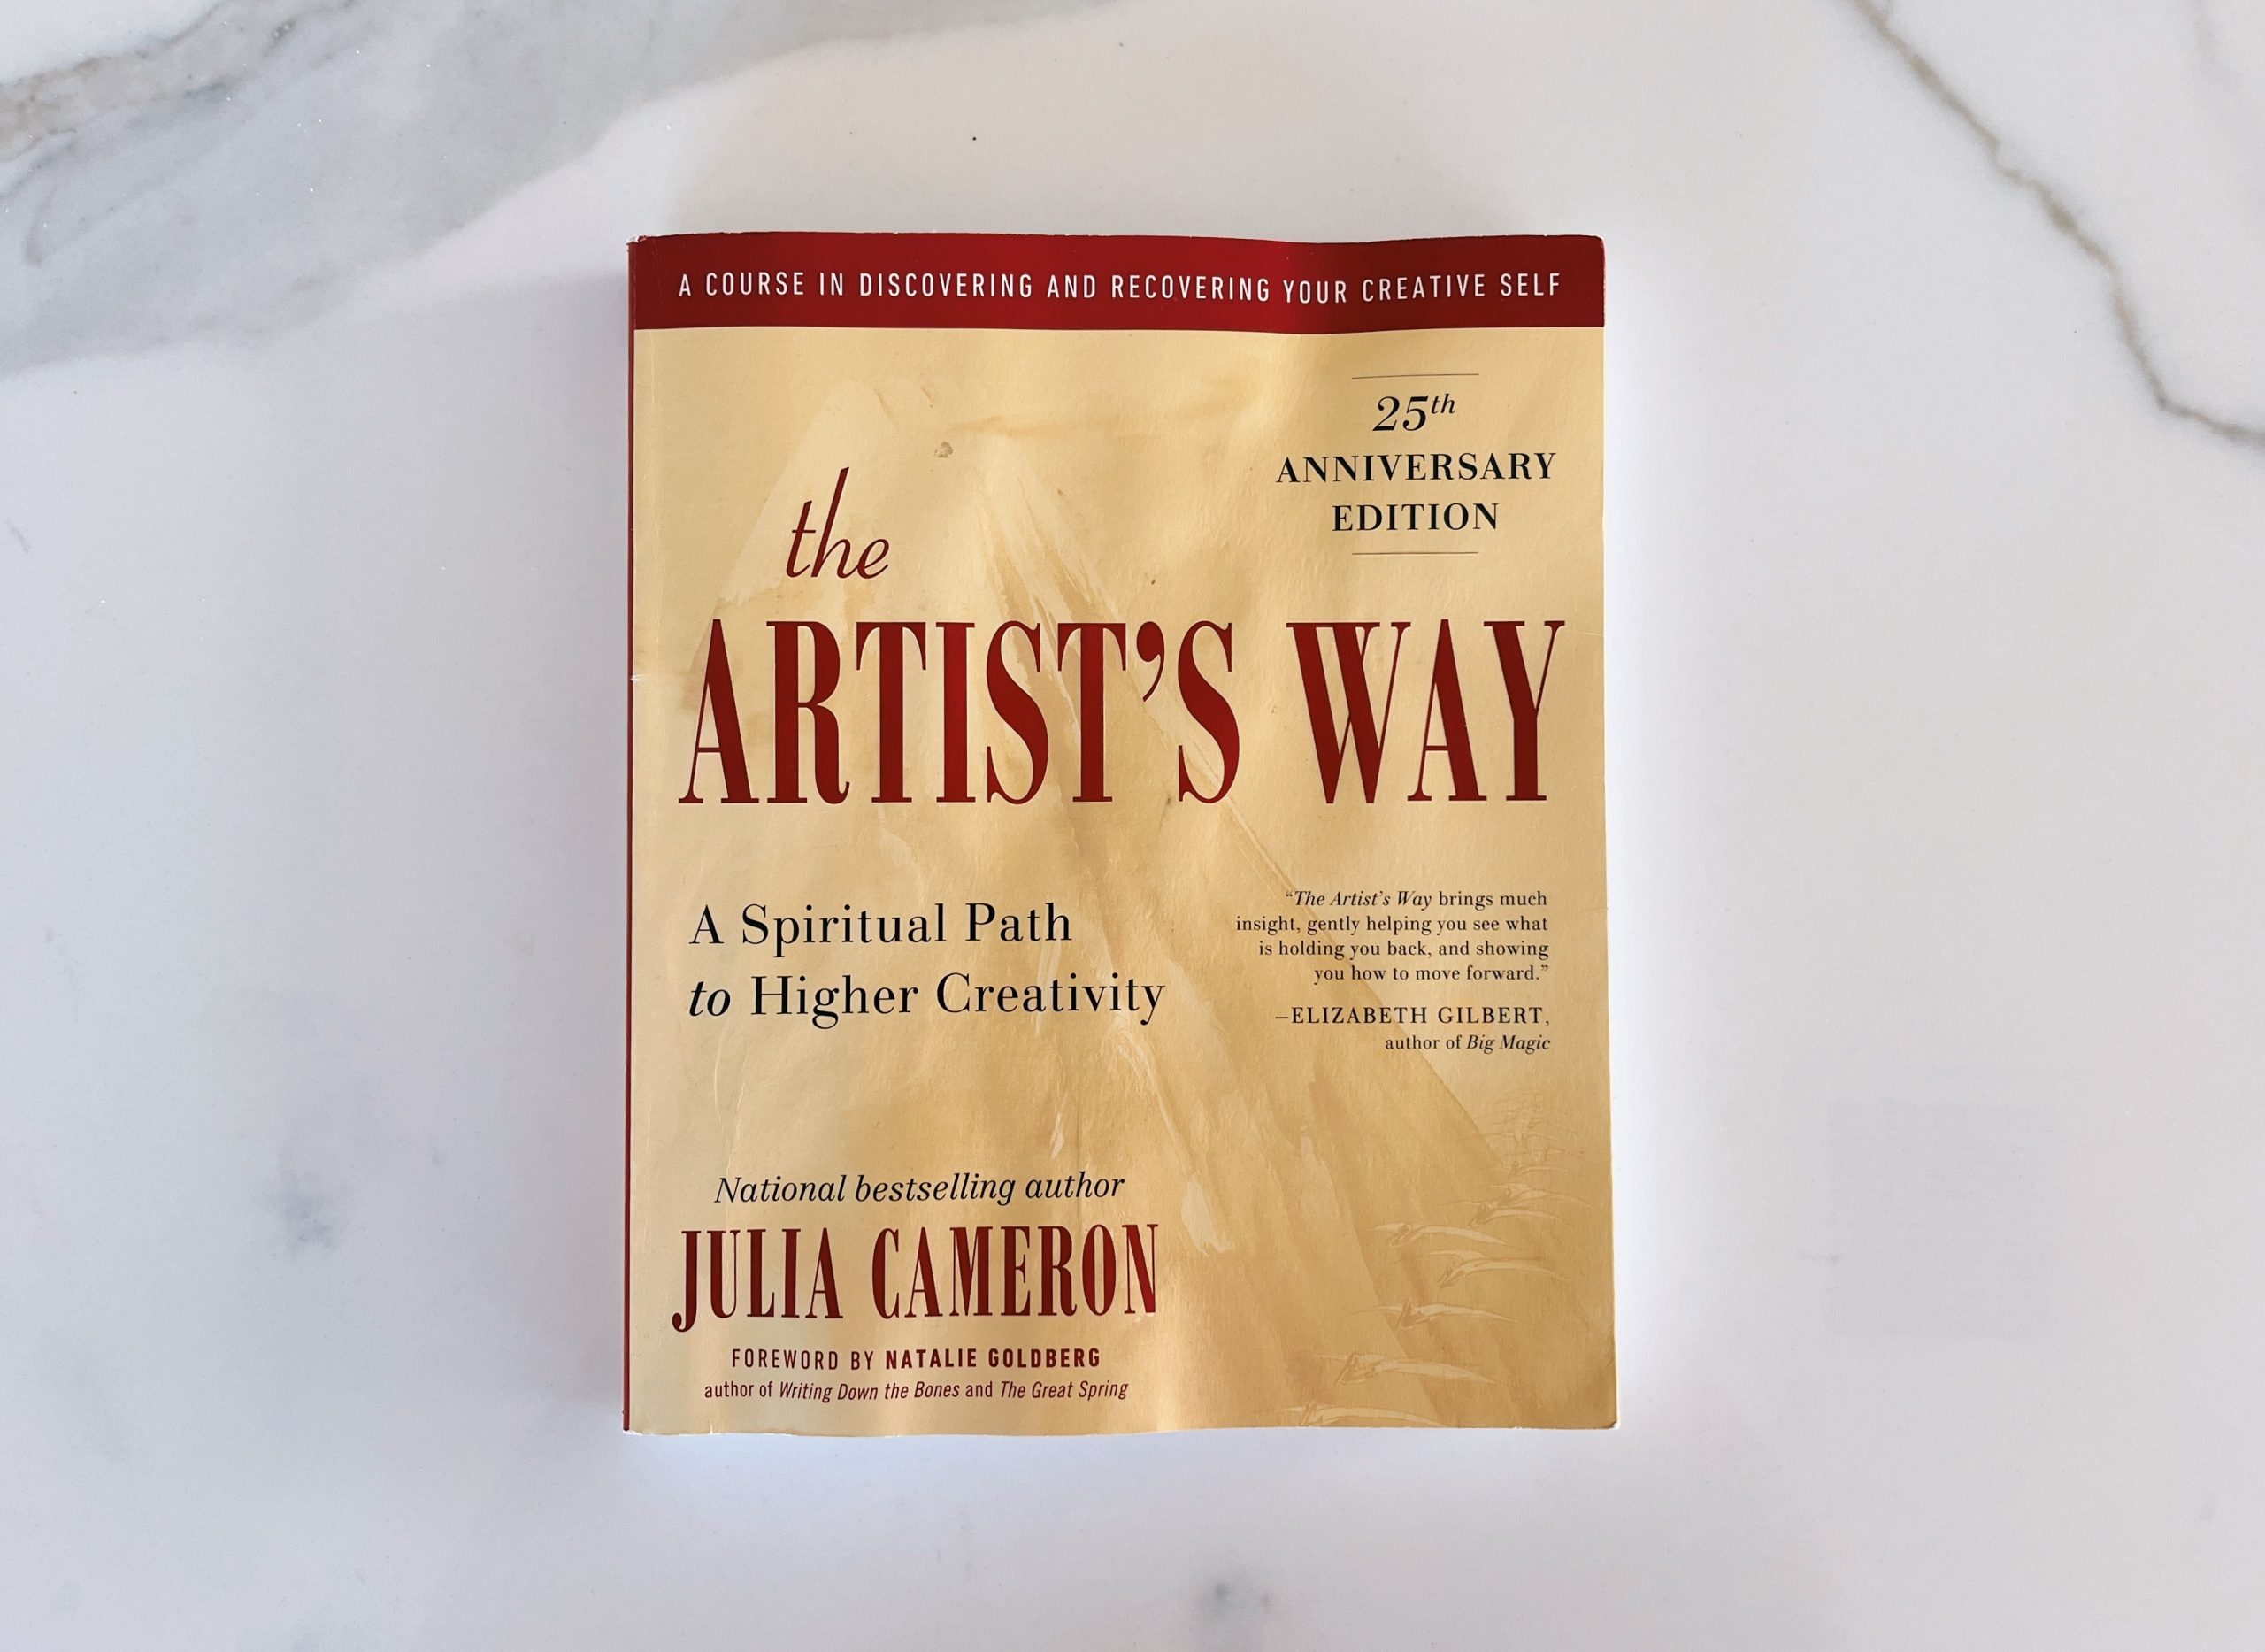 10 Things I Learned from The Artist's Way by Julia Cameron - Ruth Nuss